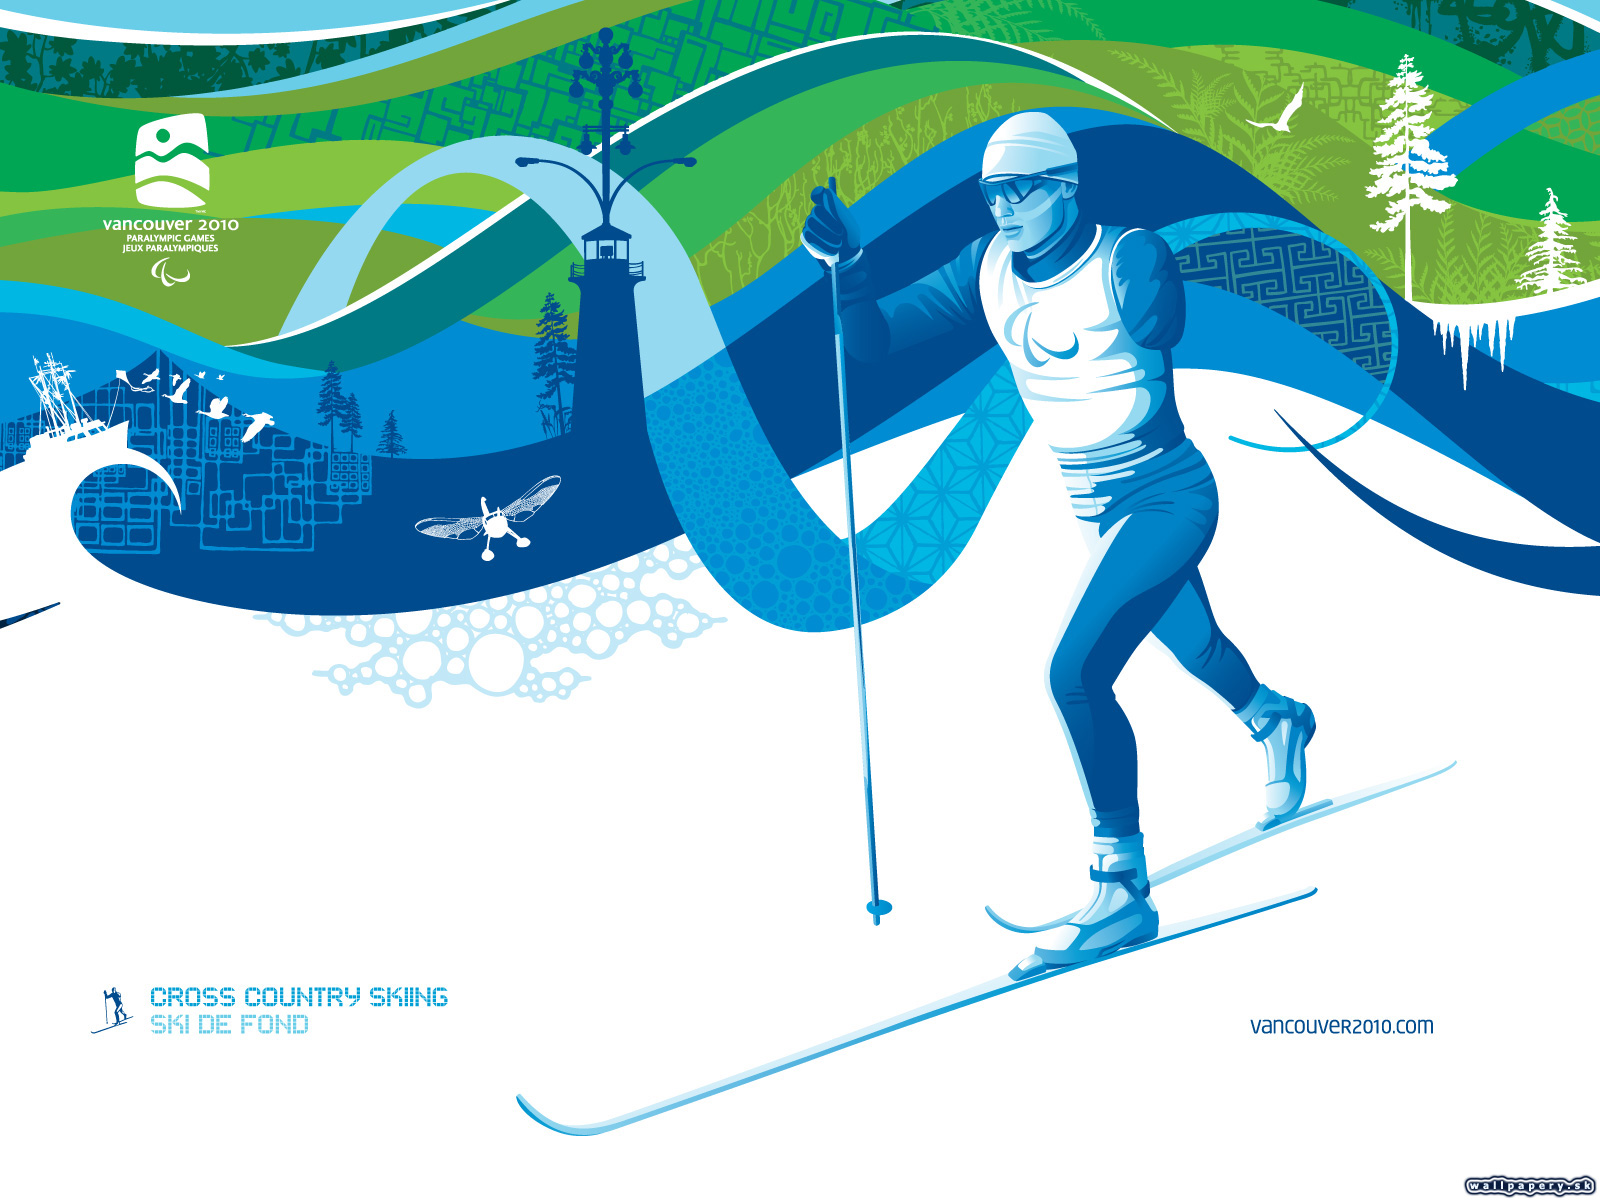 Vancouver 2010 - The Official Video Game of the Olympic Winter Games - wallpaper 20